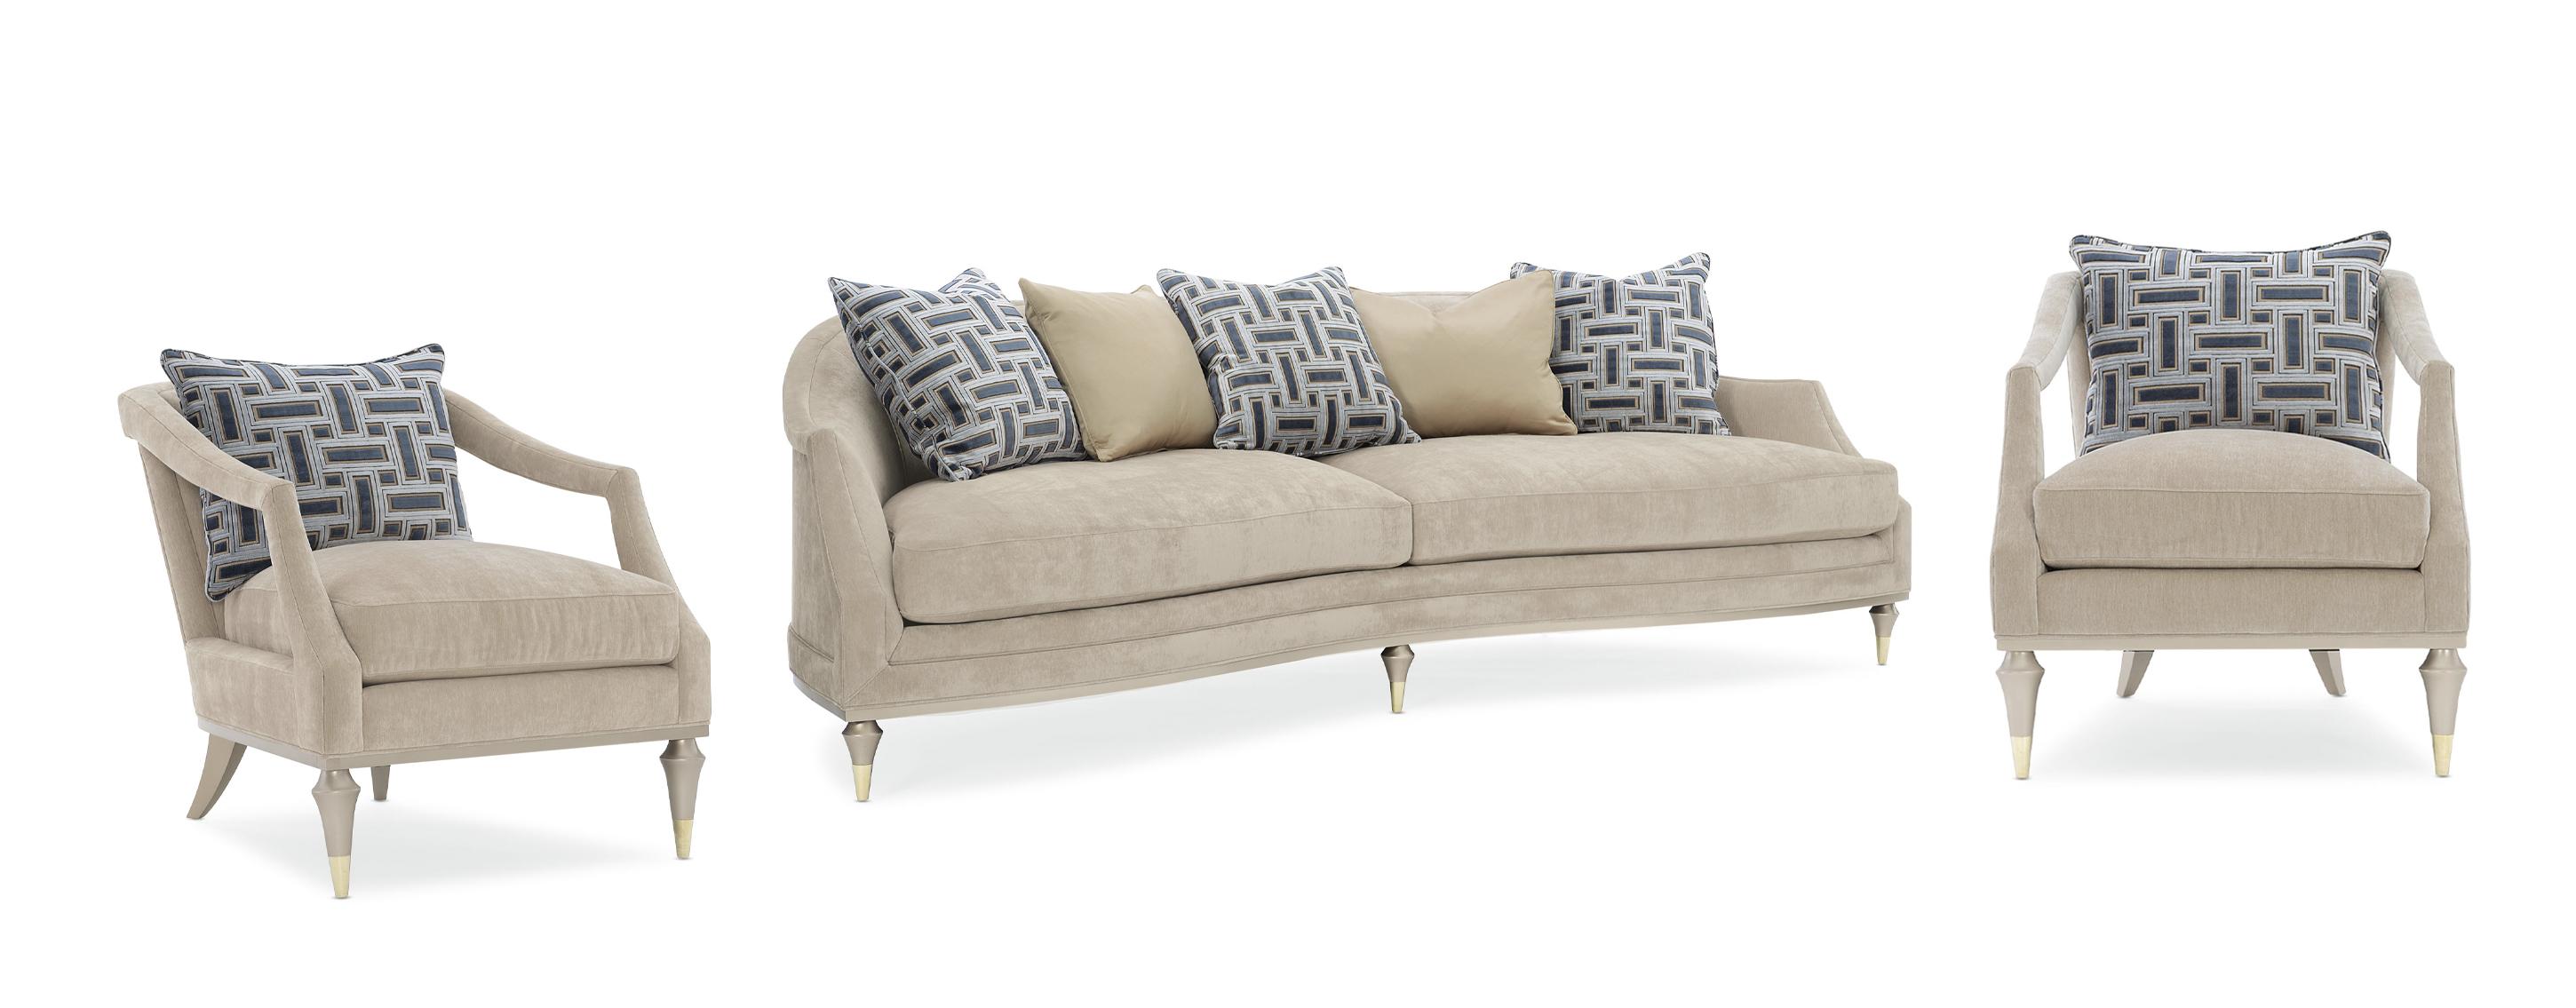 Contemporary Sofa and 2 Chairs Living Large UPH-420-011-A-Set-3 in Taupe Fabric